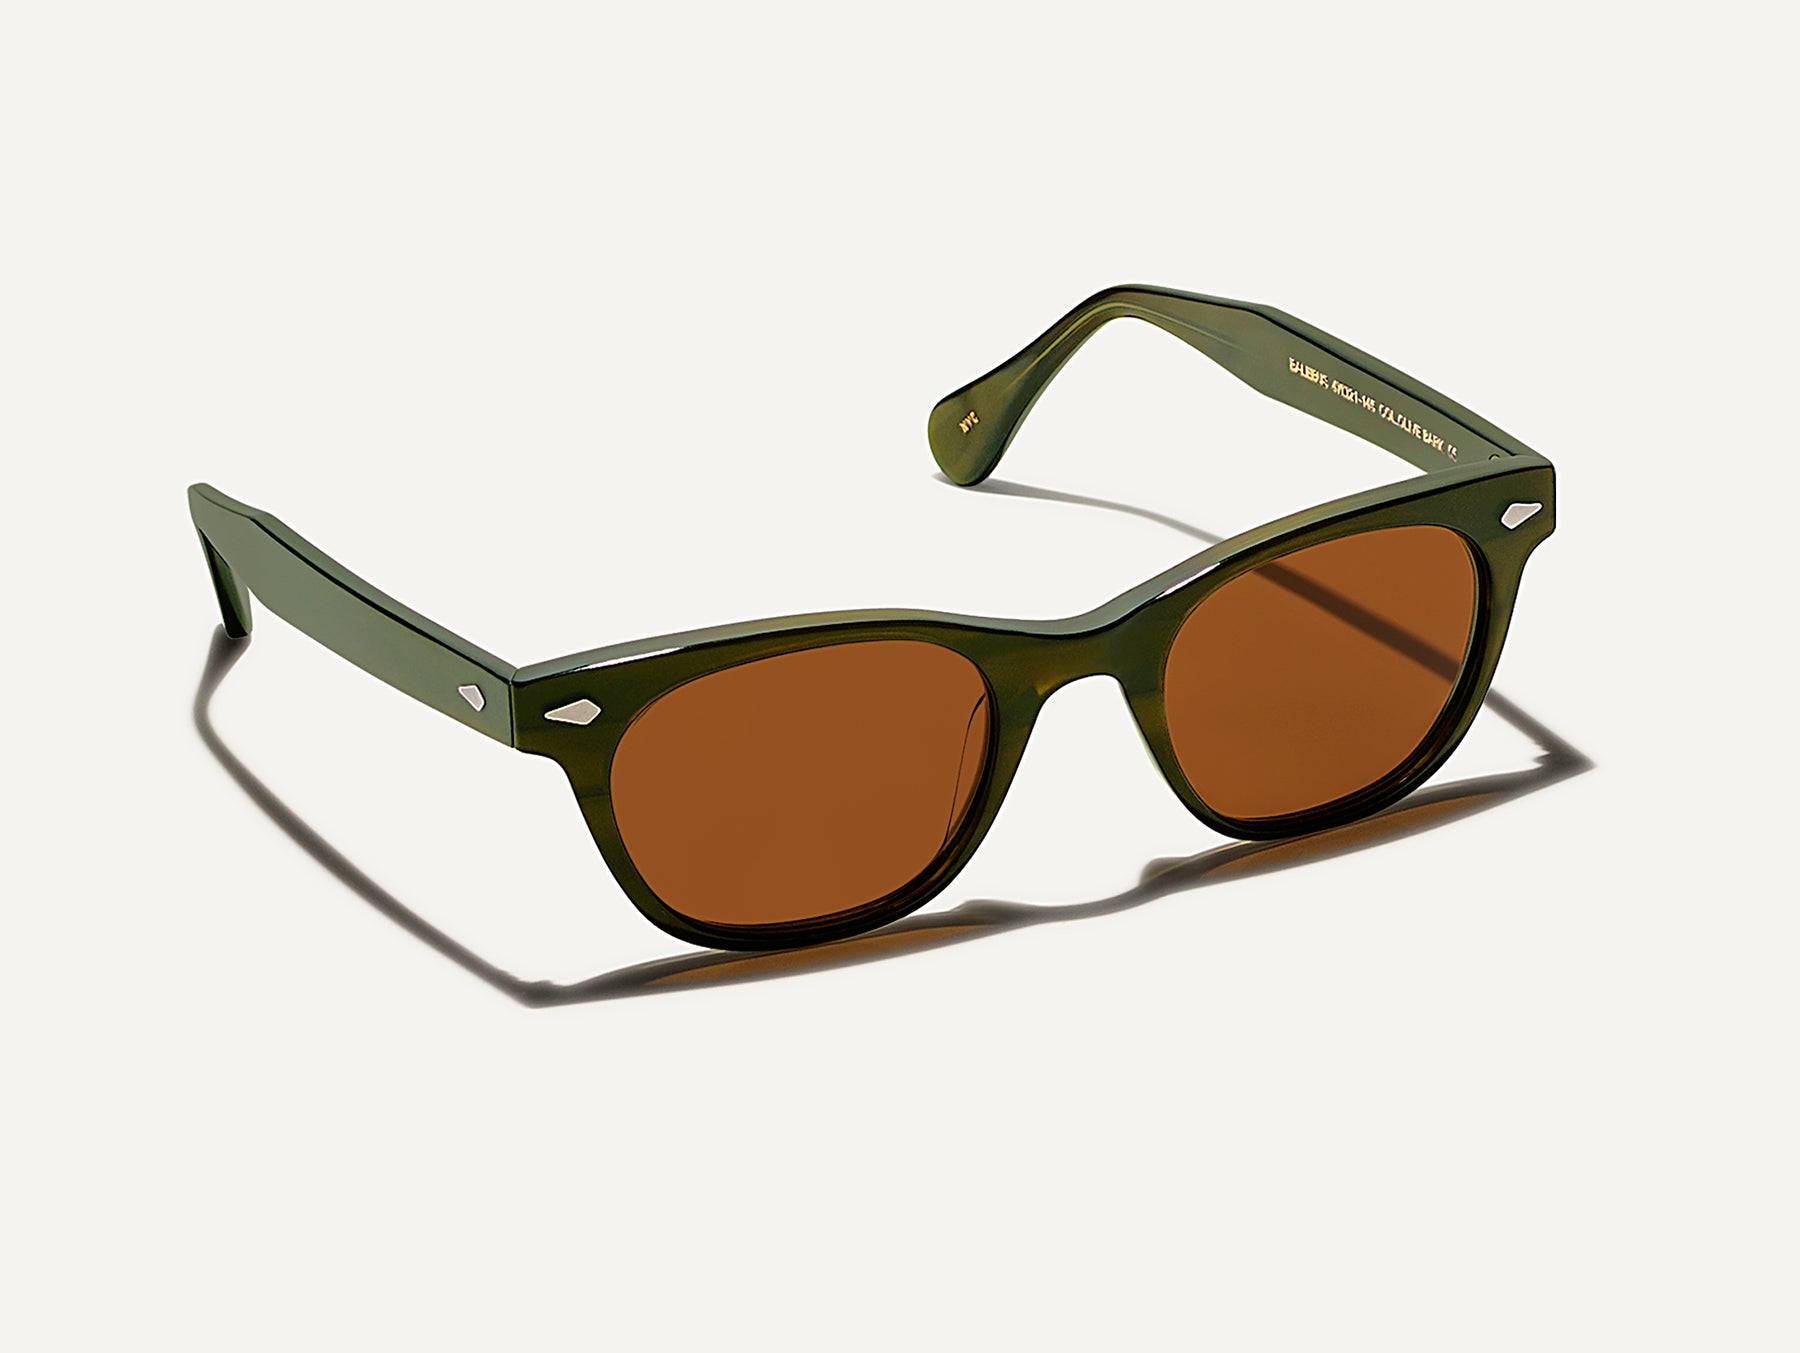 The BALEBUS SUN in Olive Bark with Cosmitan Brown Glass Lenses